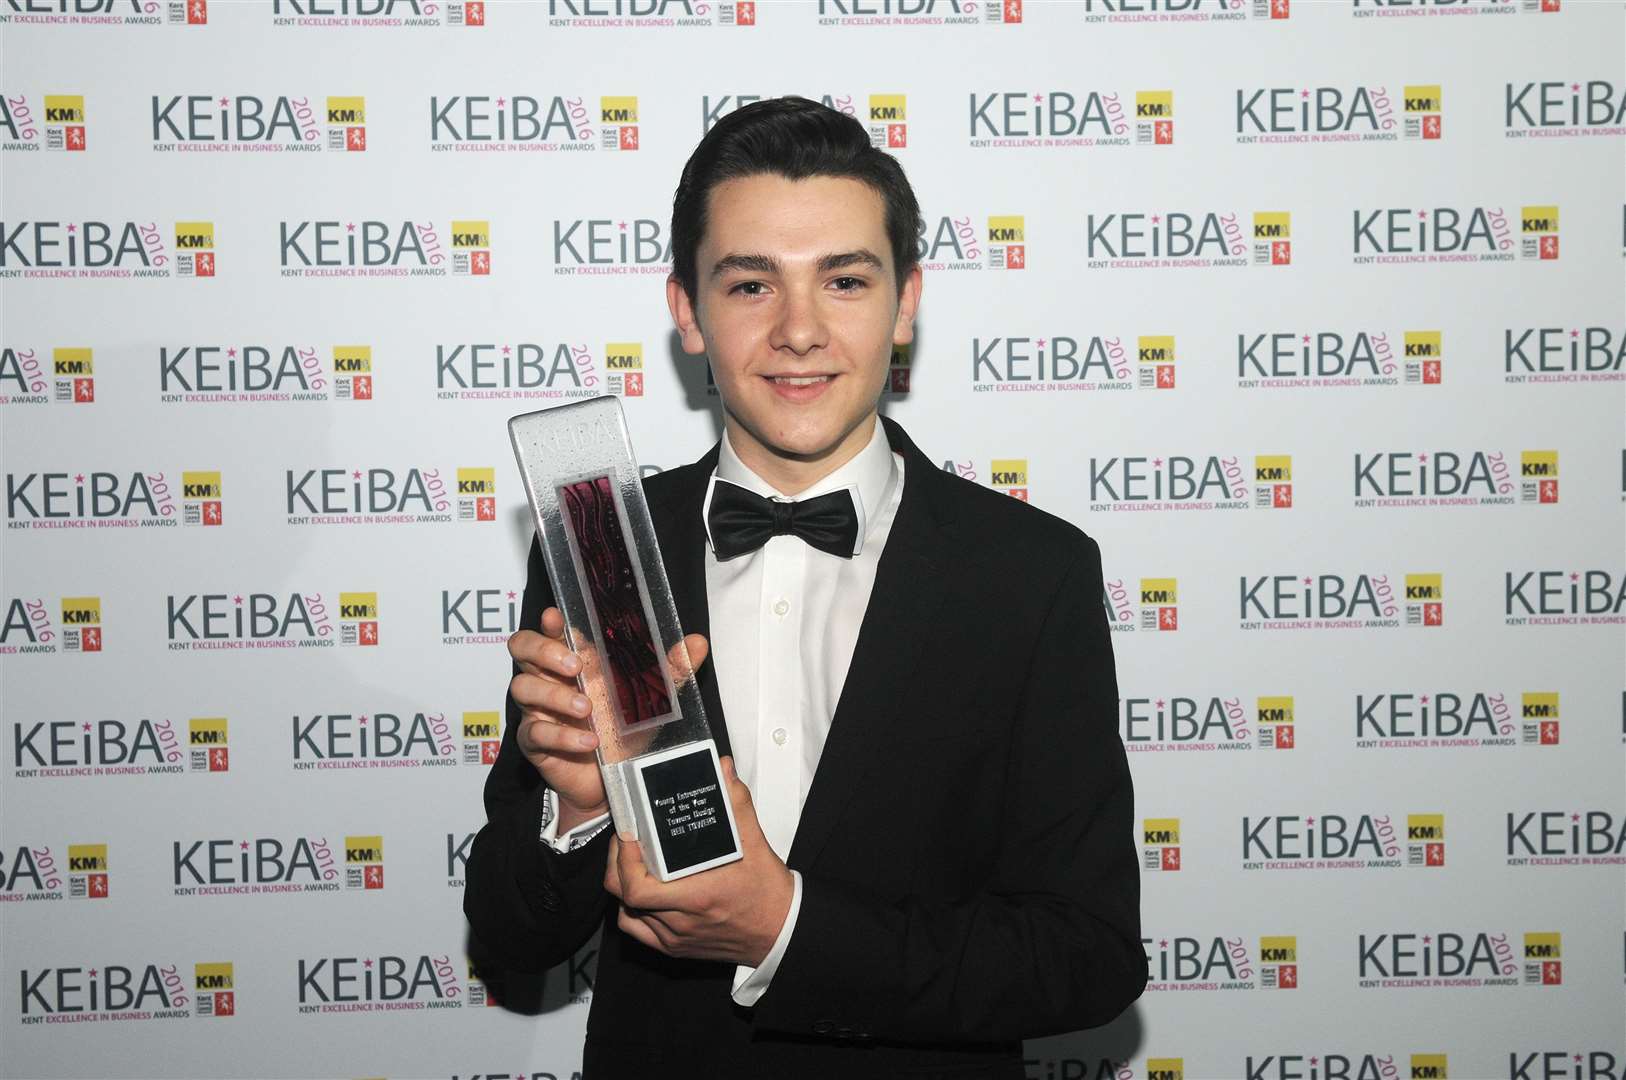 Ben Towers was named young entrepreneur of the year at KEiBA 2016